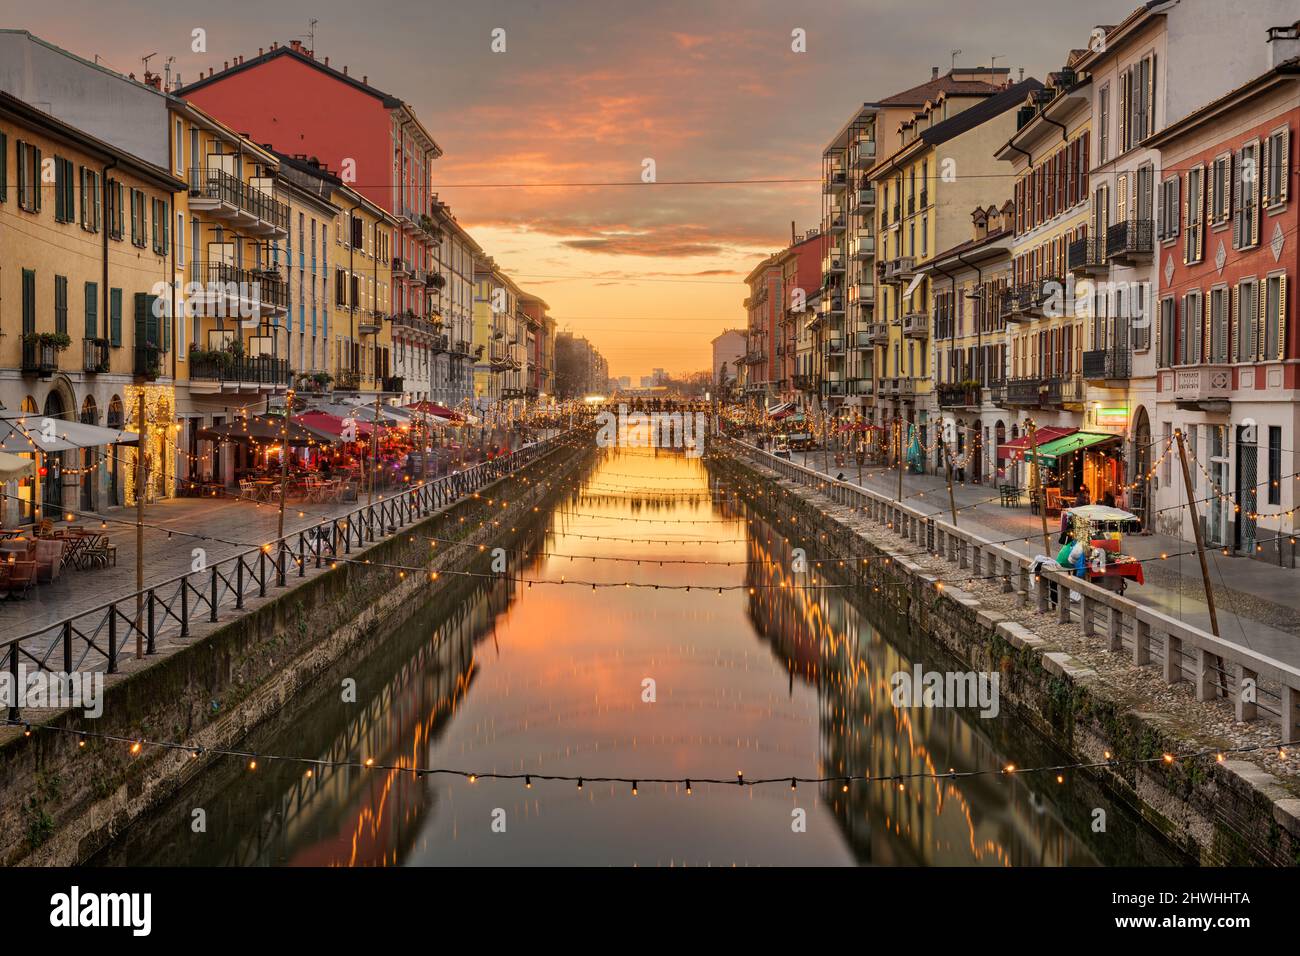 Naviglio Canal, Milan, Lombardy, Italy at twilight. Stock Photo